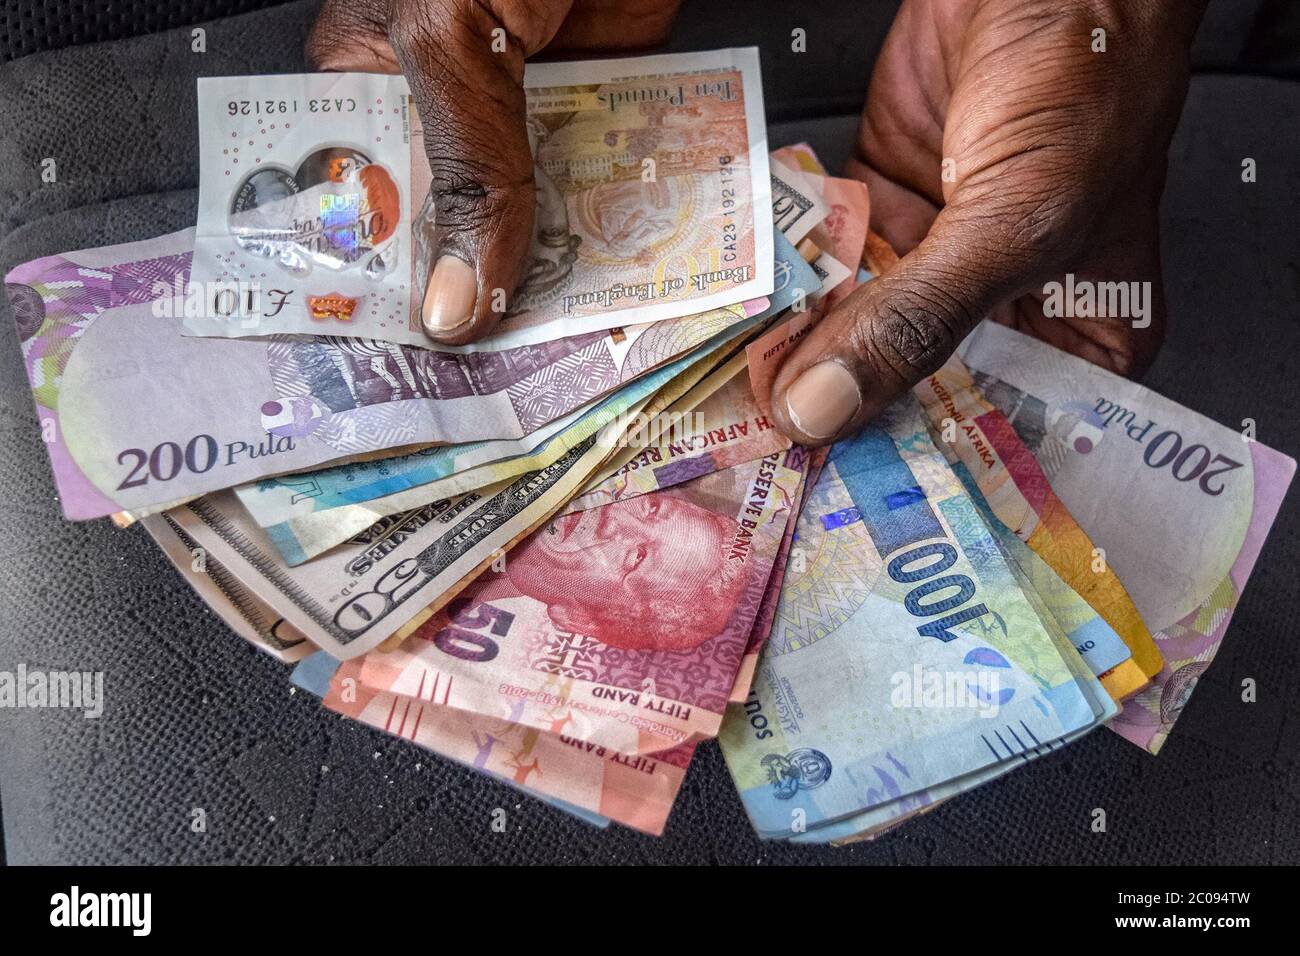 Many Zimbabweans deal daily in a host of currencies from the U.S., Botswana, Great Britain and other countries. Exchange rates are set for those currencies as well as for local mobile money, bond notes and more, but each exchange rate changes from minute to minute on the black market. (Linda Mujuru, GPJ Zimbabwe) Stock Photo